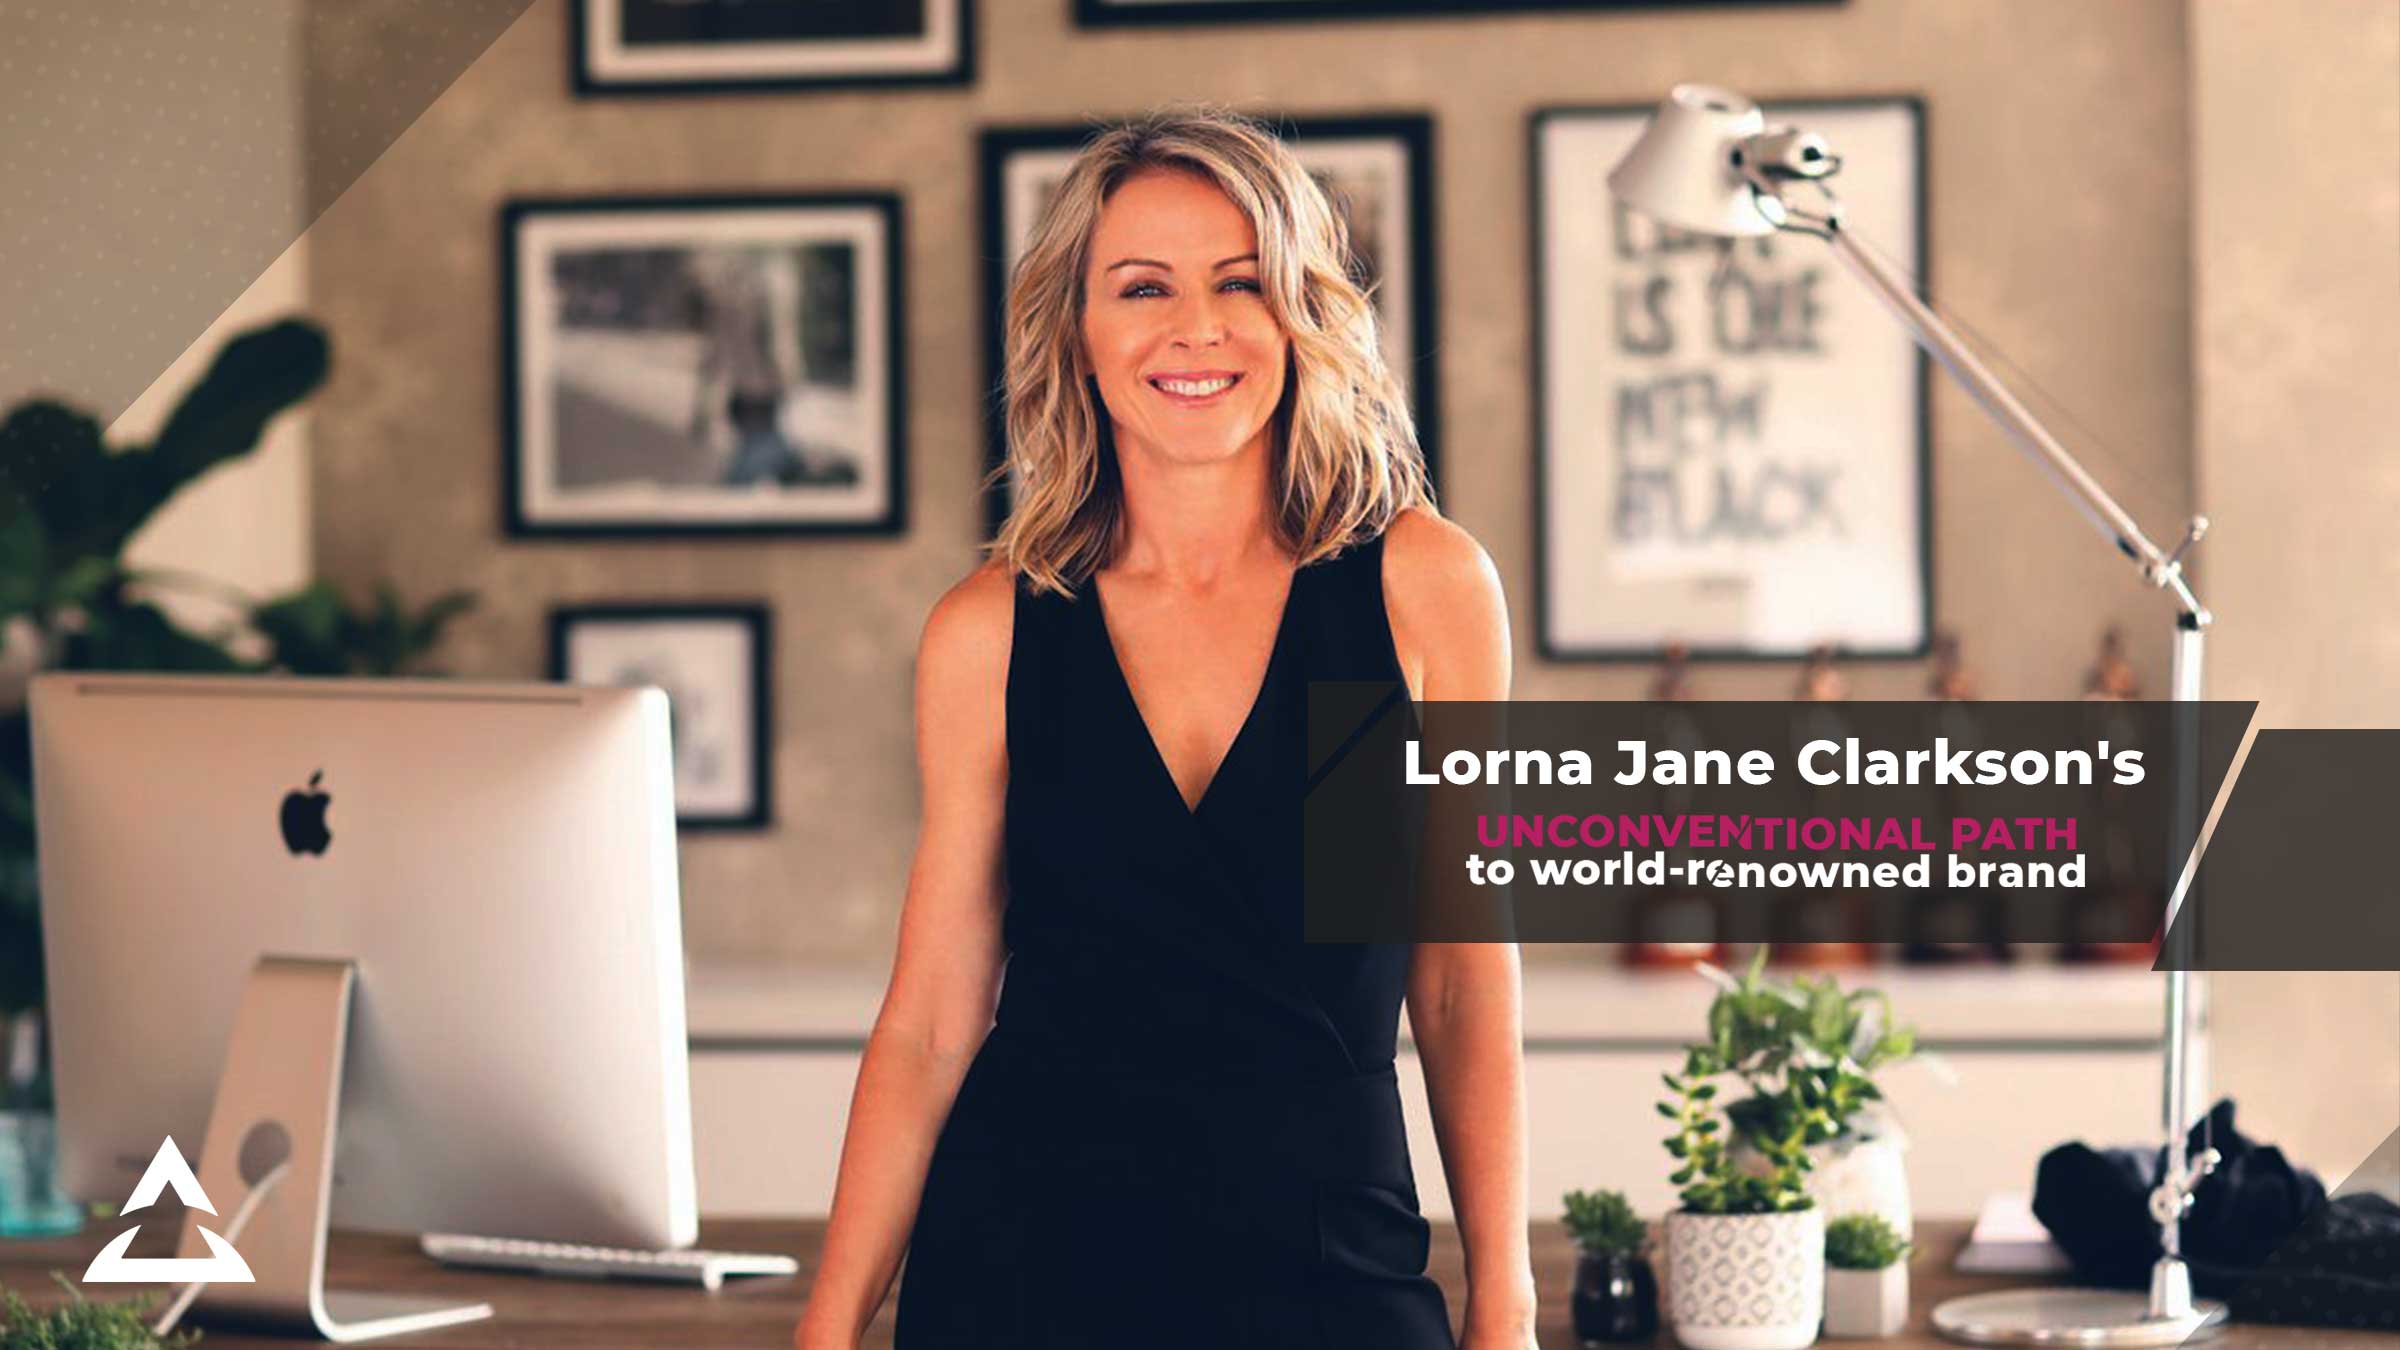 Lorna Jane Clarkson on how to stay relevant in the oversaturated